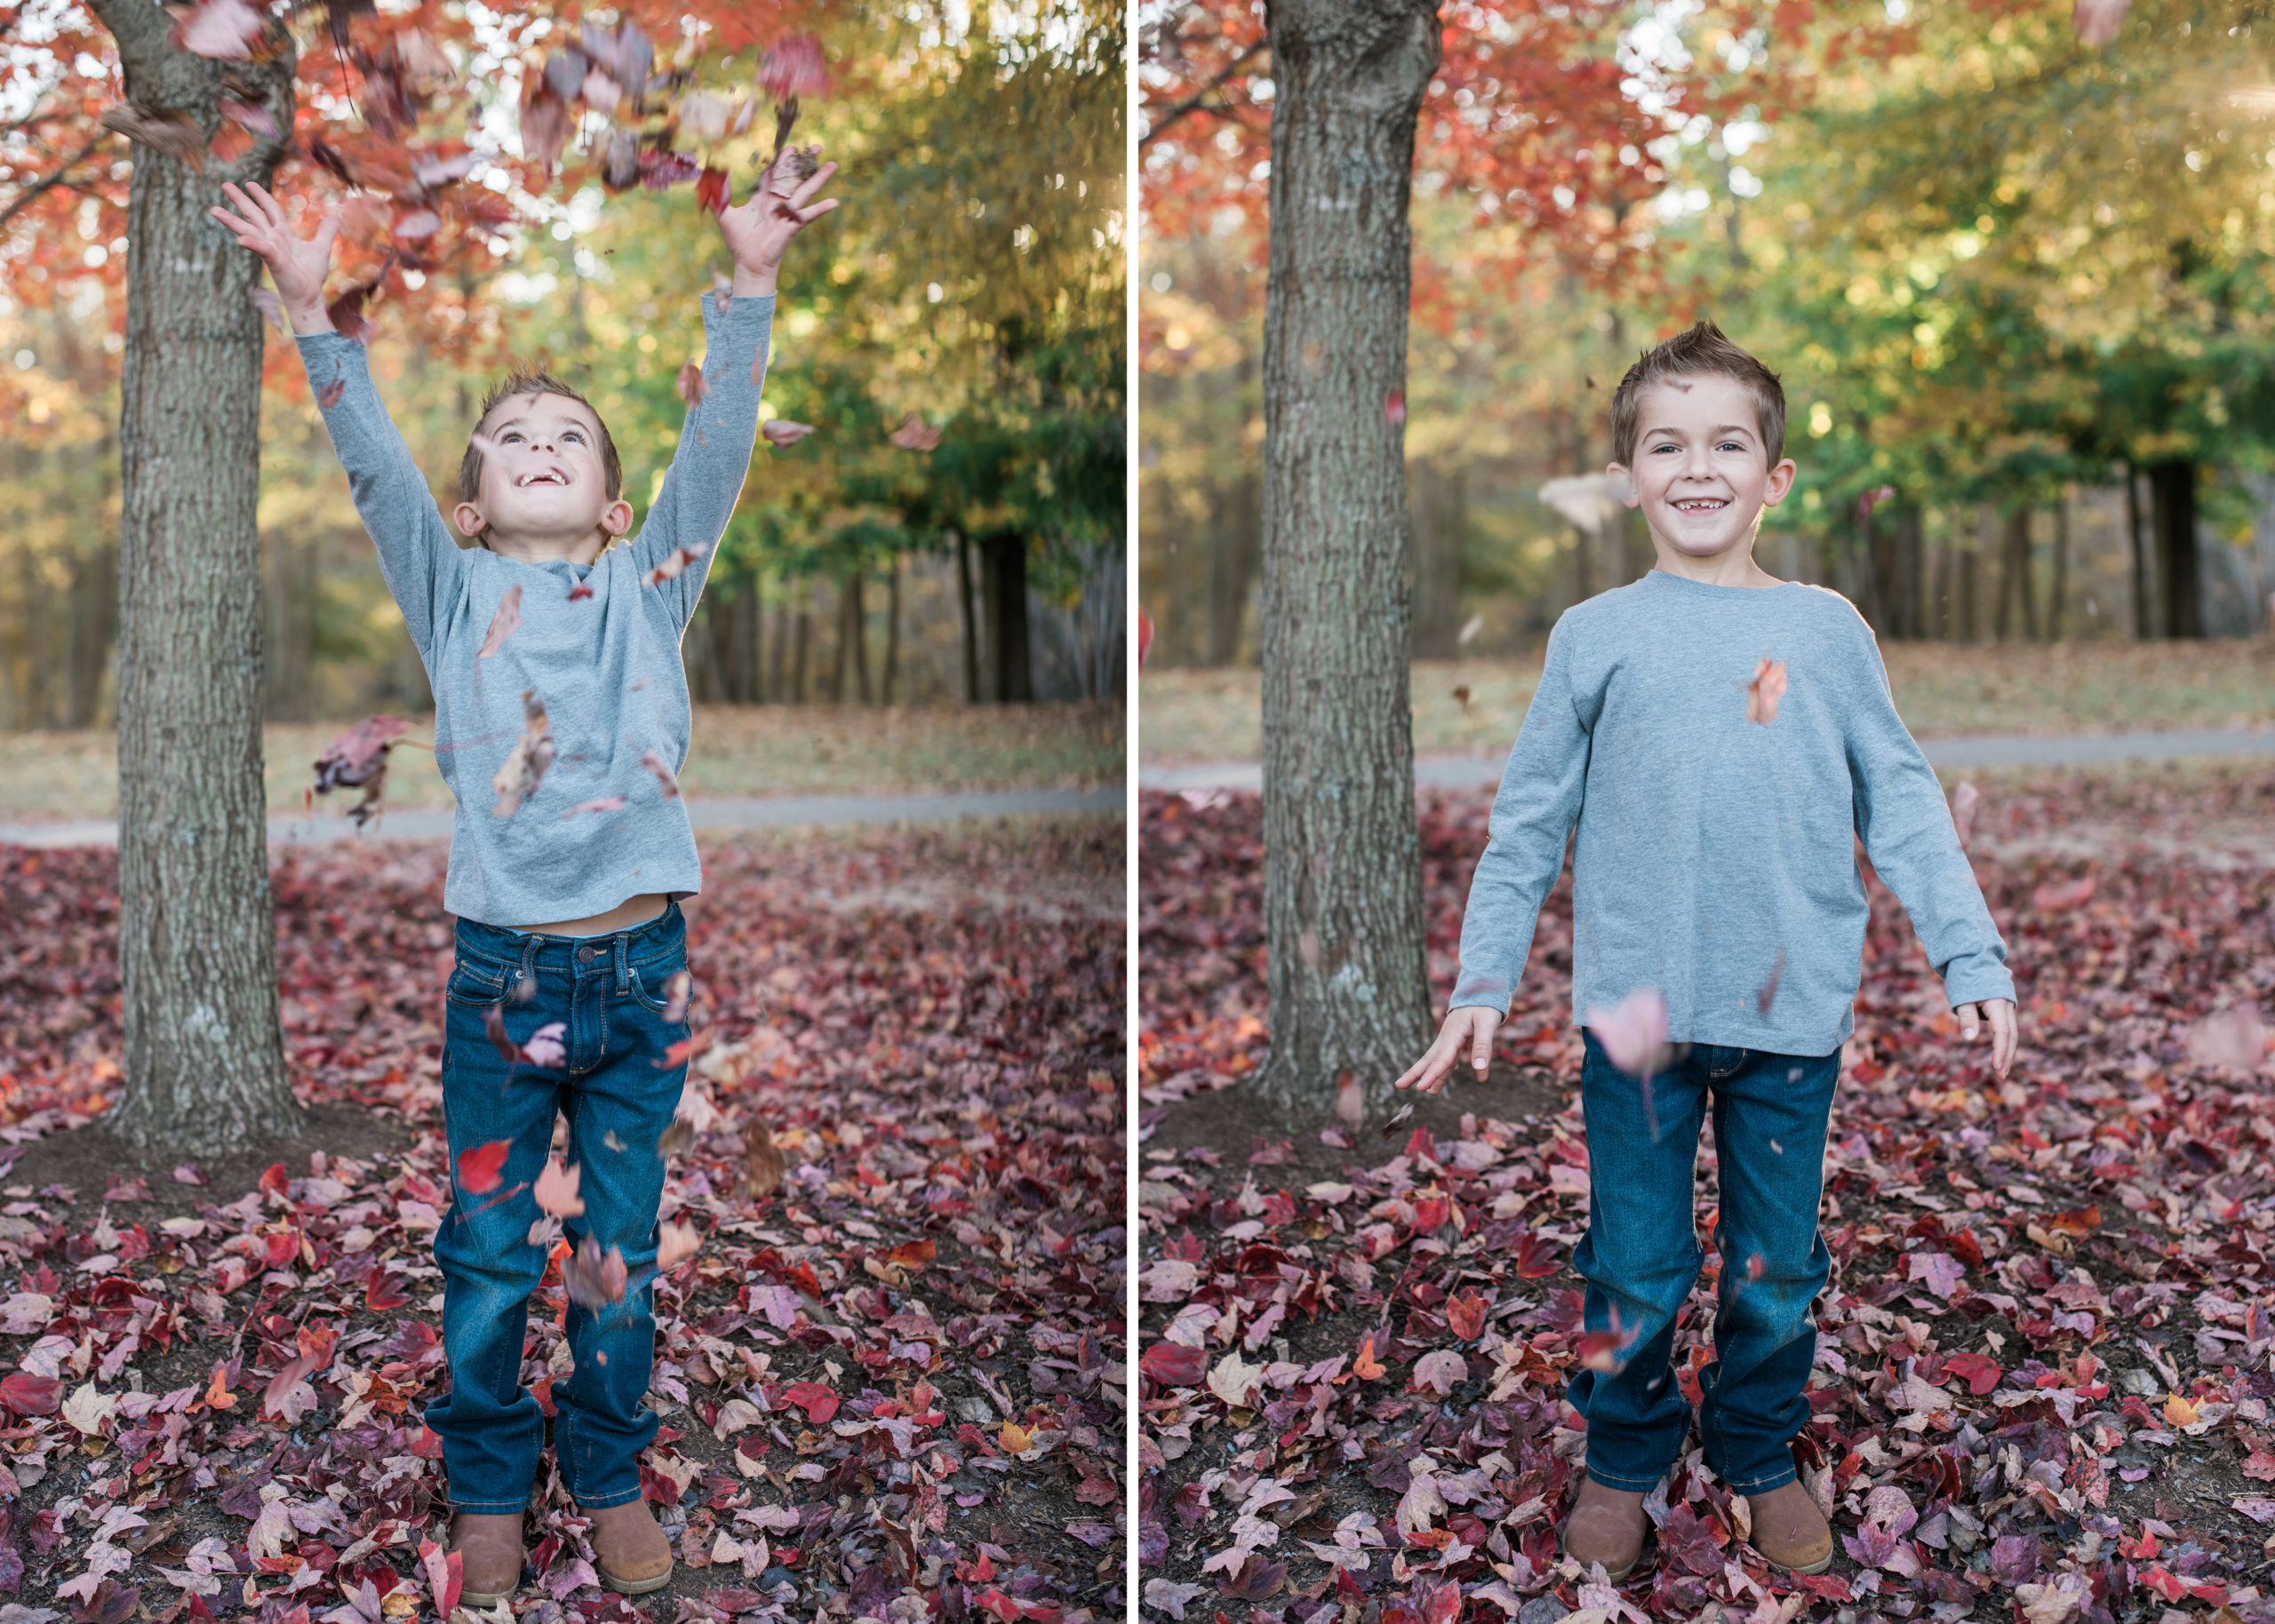 Raleigh, Cary, NC Family photographer, family photography session